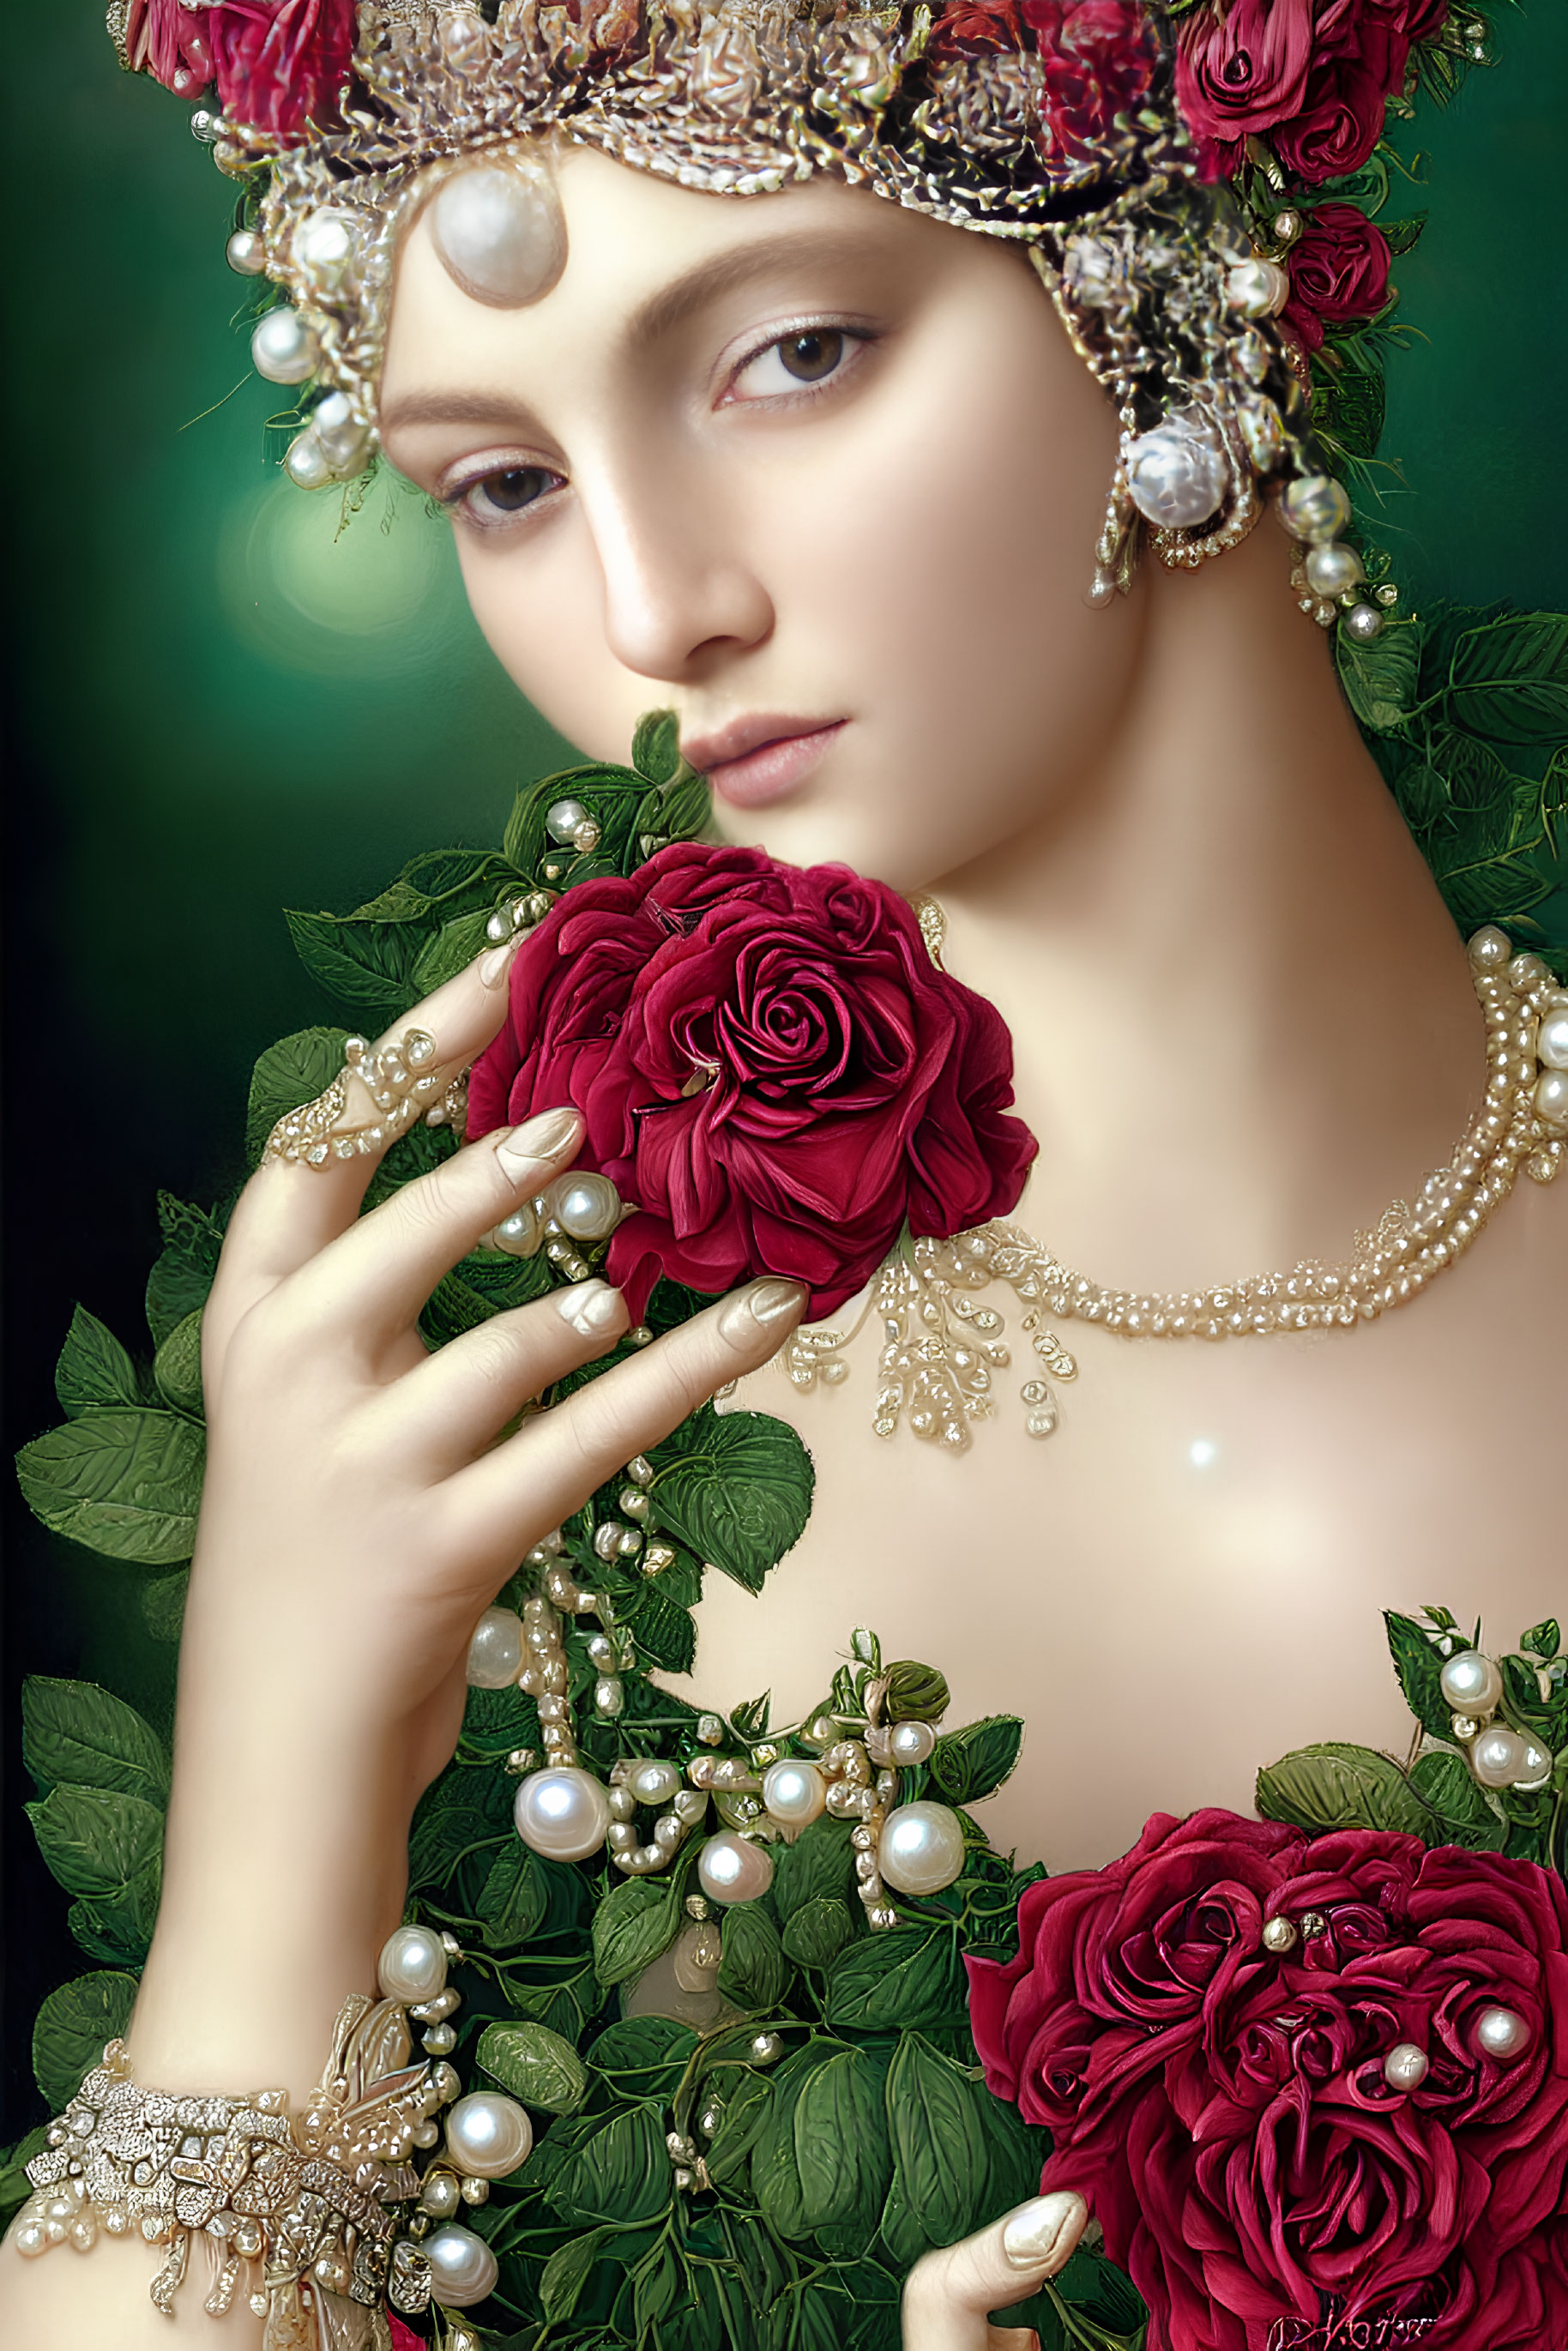 Woman adorned with pearls and roses in decorative headgear surrounded by green foliage and intricate jewelry